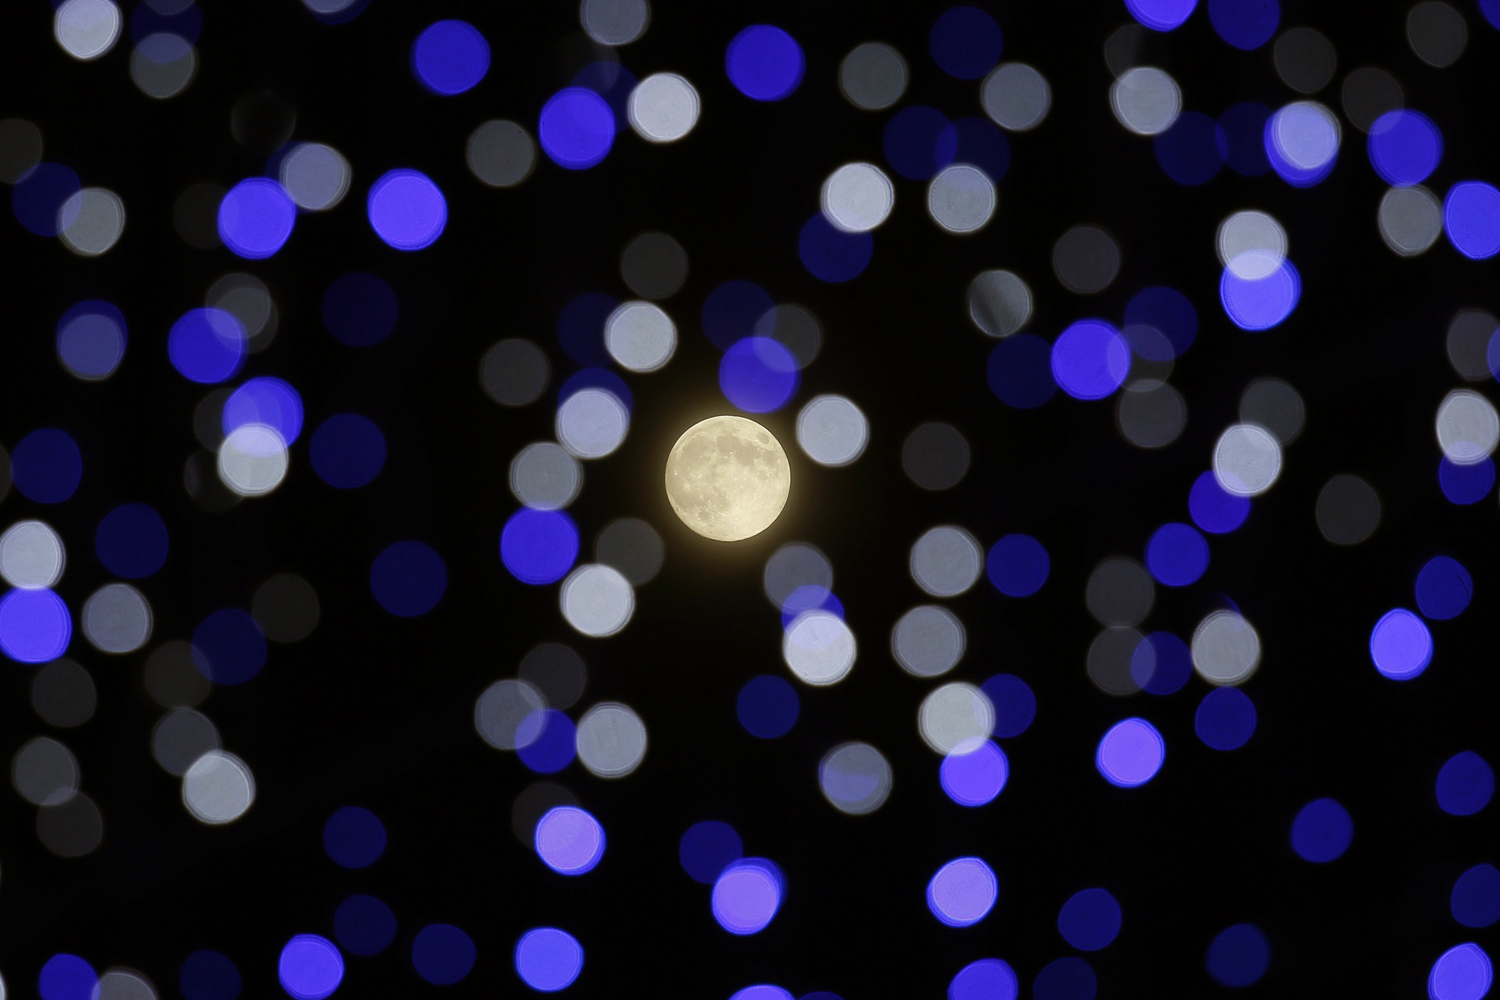 The moon shines in between lighting installation during Mid-Autumn or Lantern Festival at Hong Kong's Victoria Park